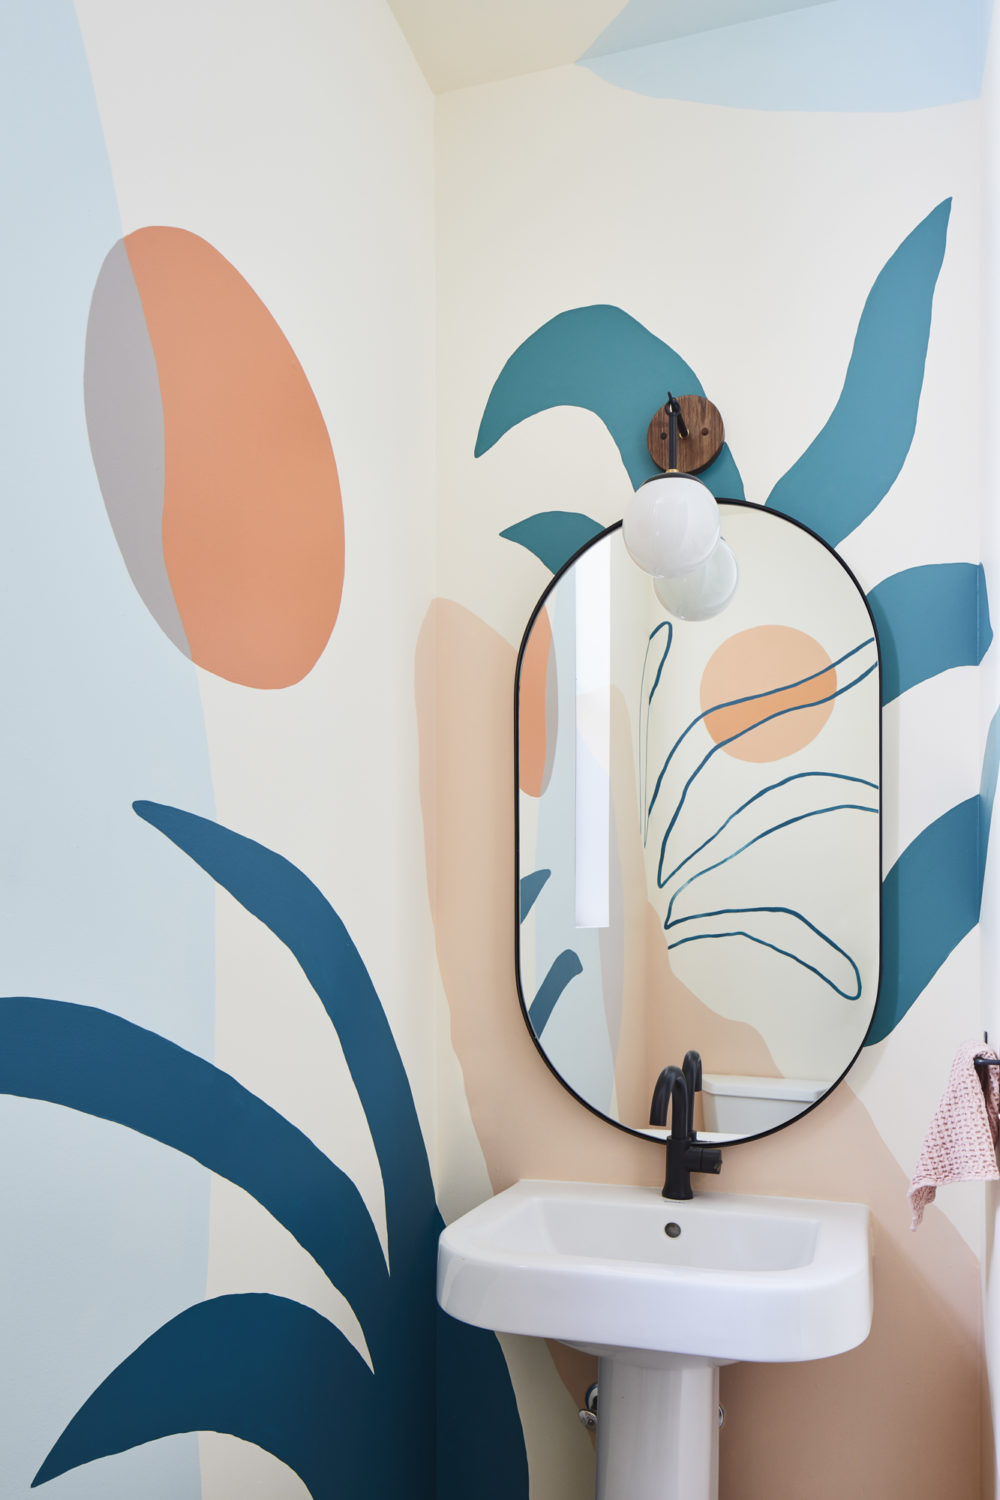 Abstract Mural By Amity Worrel